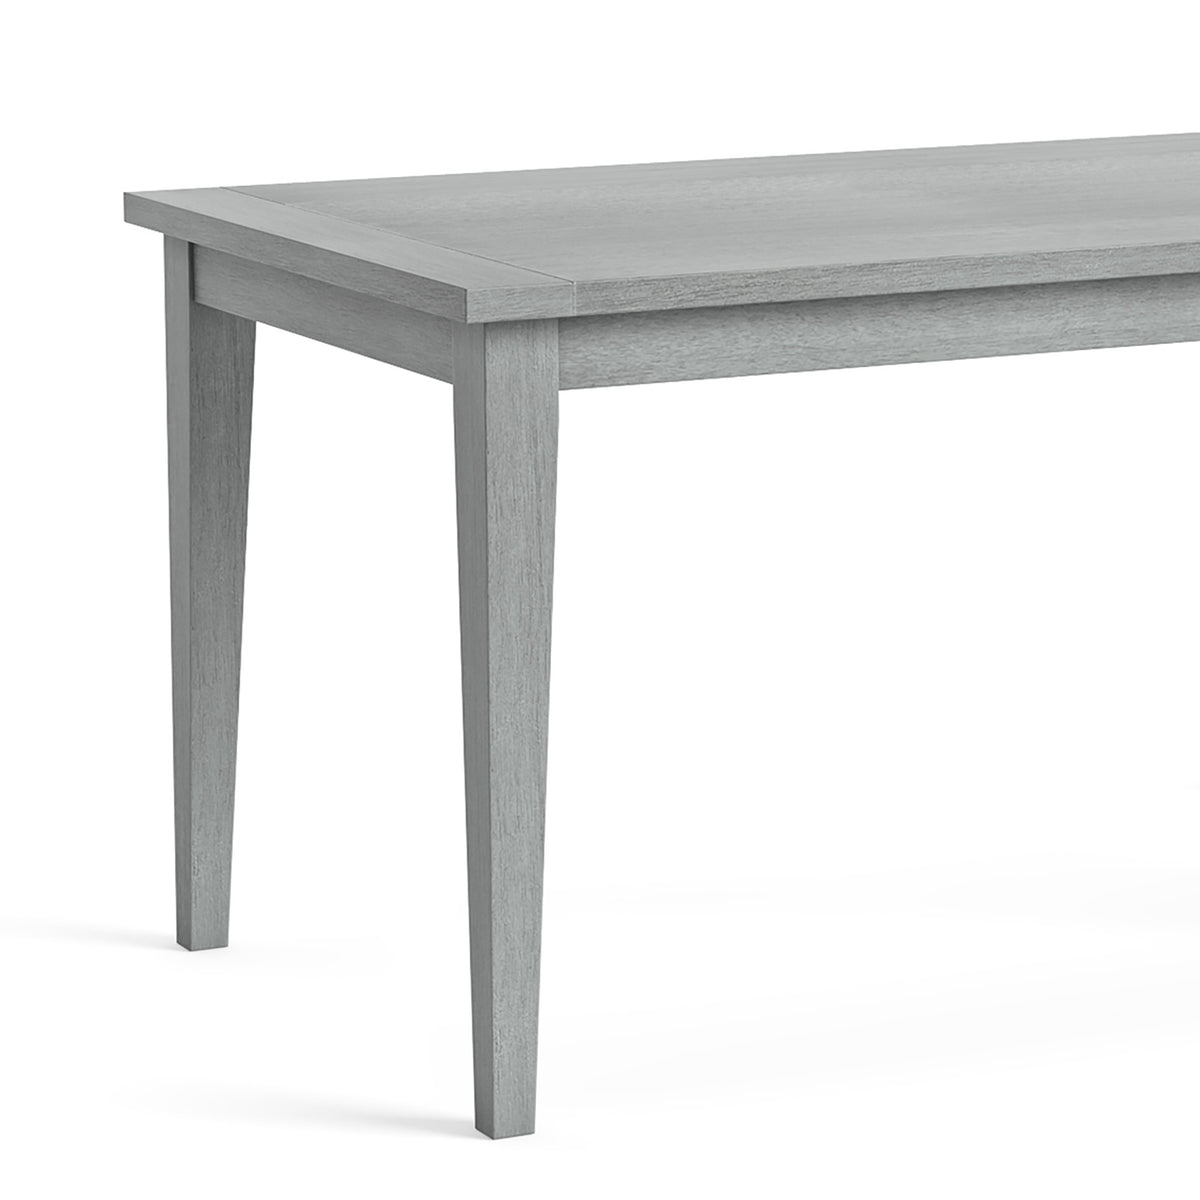 Elise Gris Grey Acacia 120cm Fixed Dining Table close up of legs